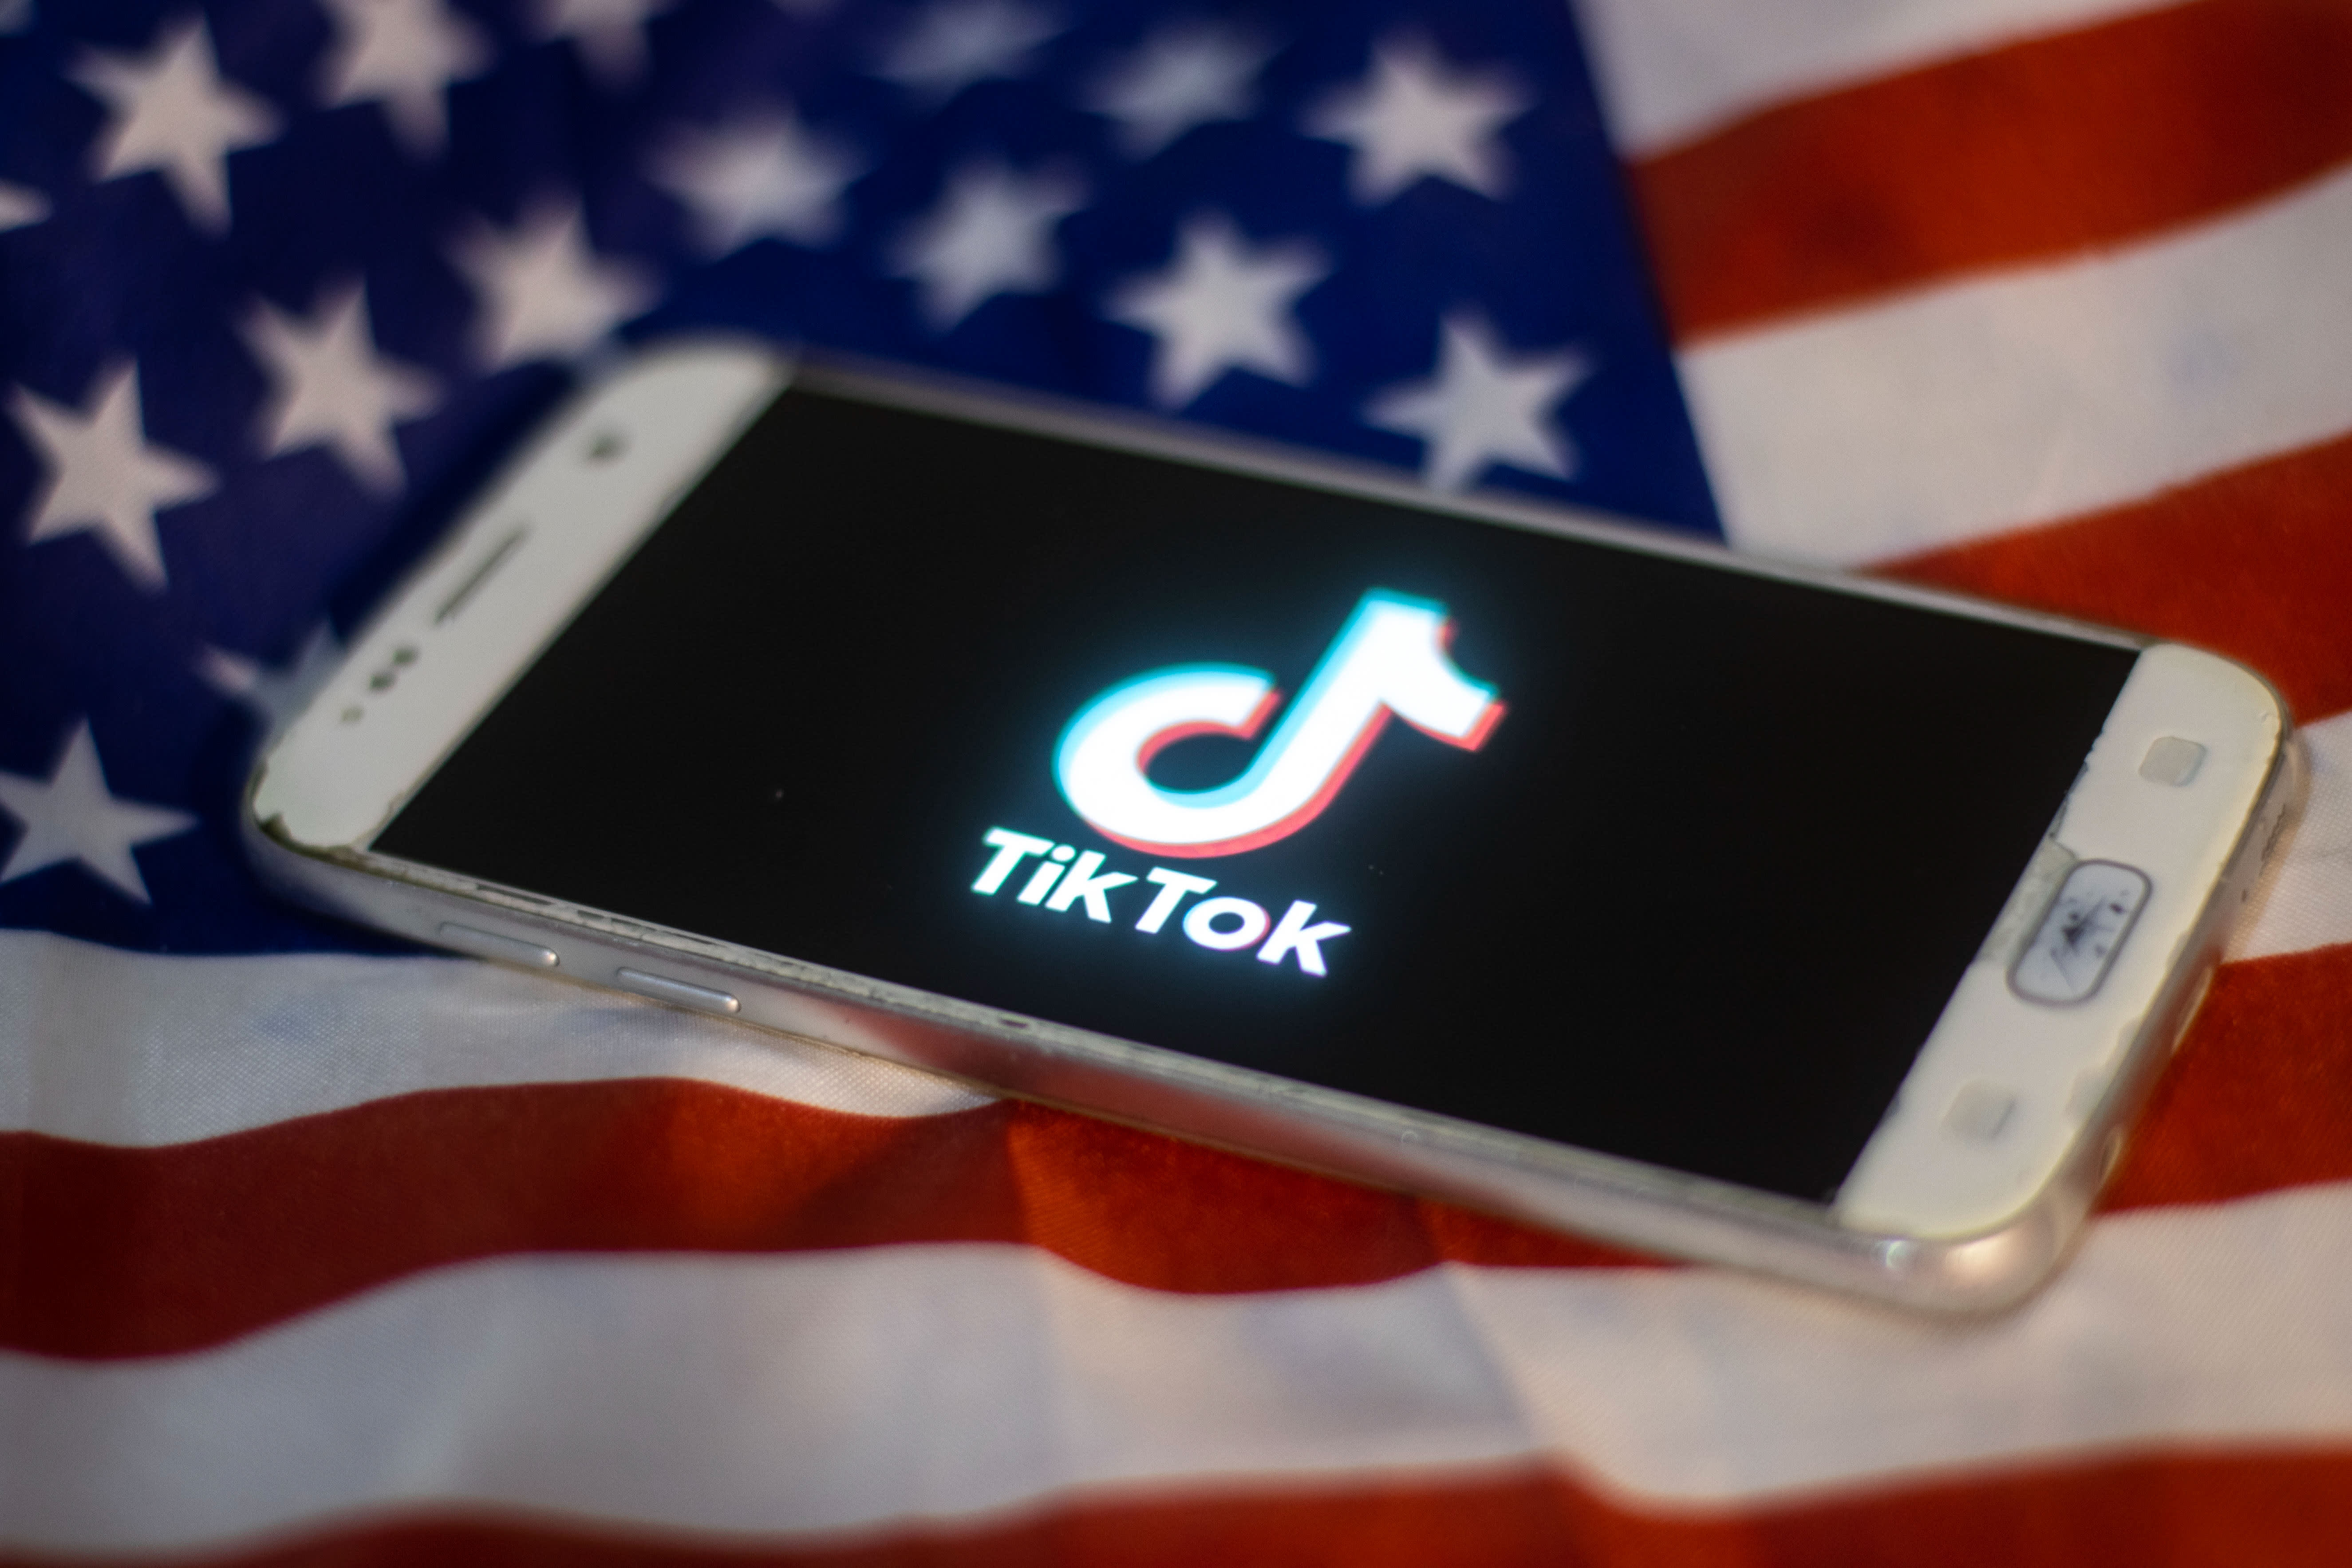 TikTok%20also%20has%20an%20application%20in%20the%20U.S